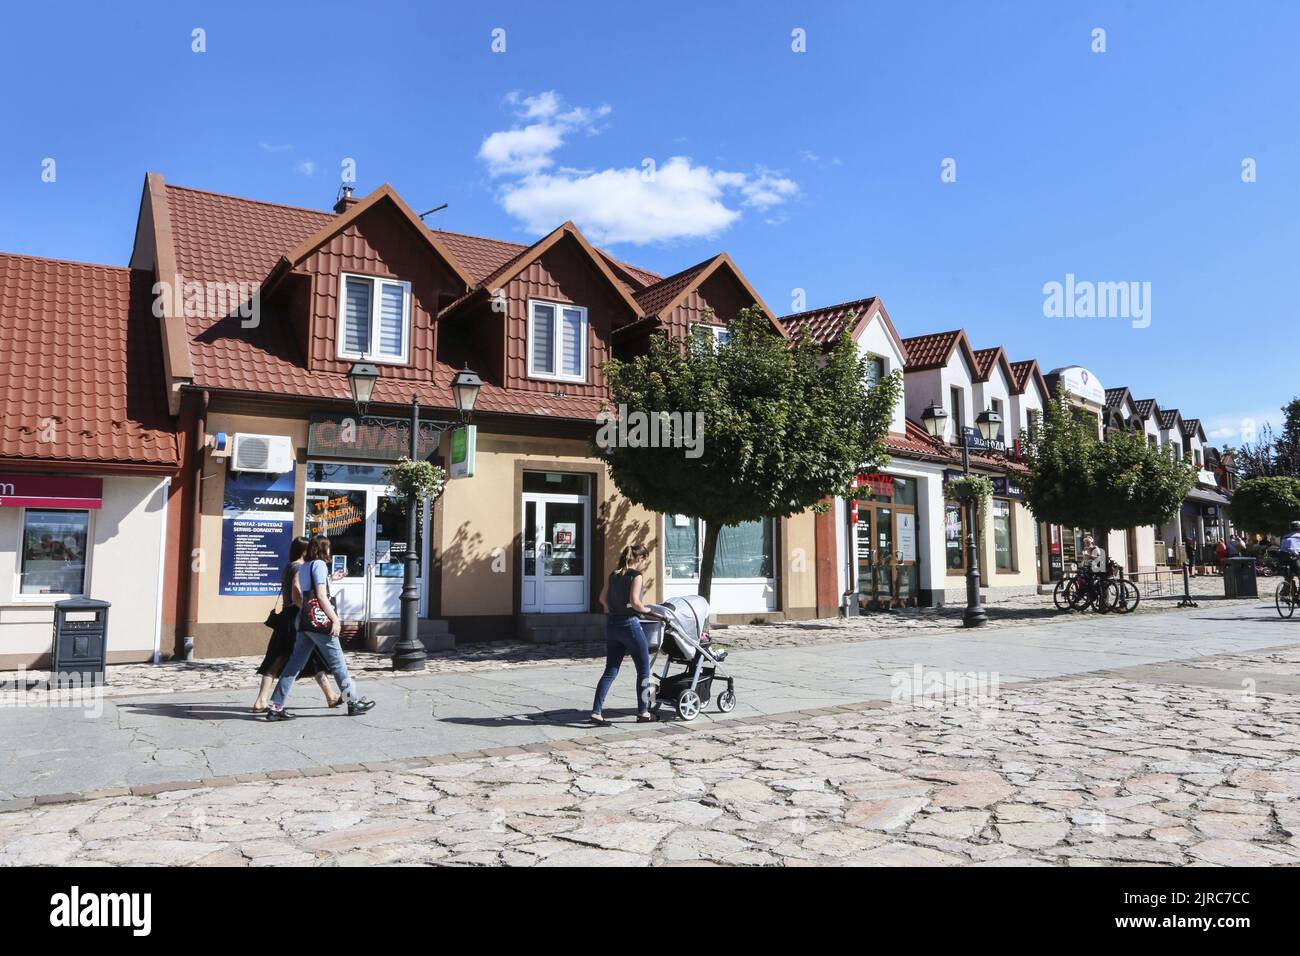 A people walking through an old town of Niepolomice, Poland. Stock Photo